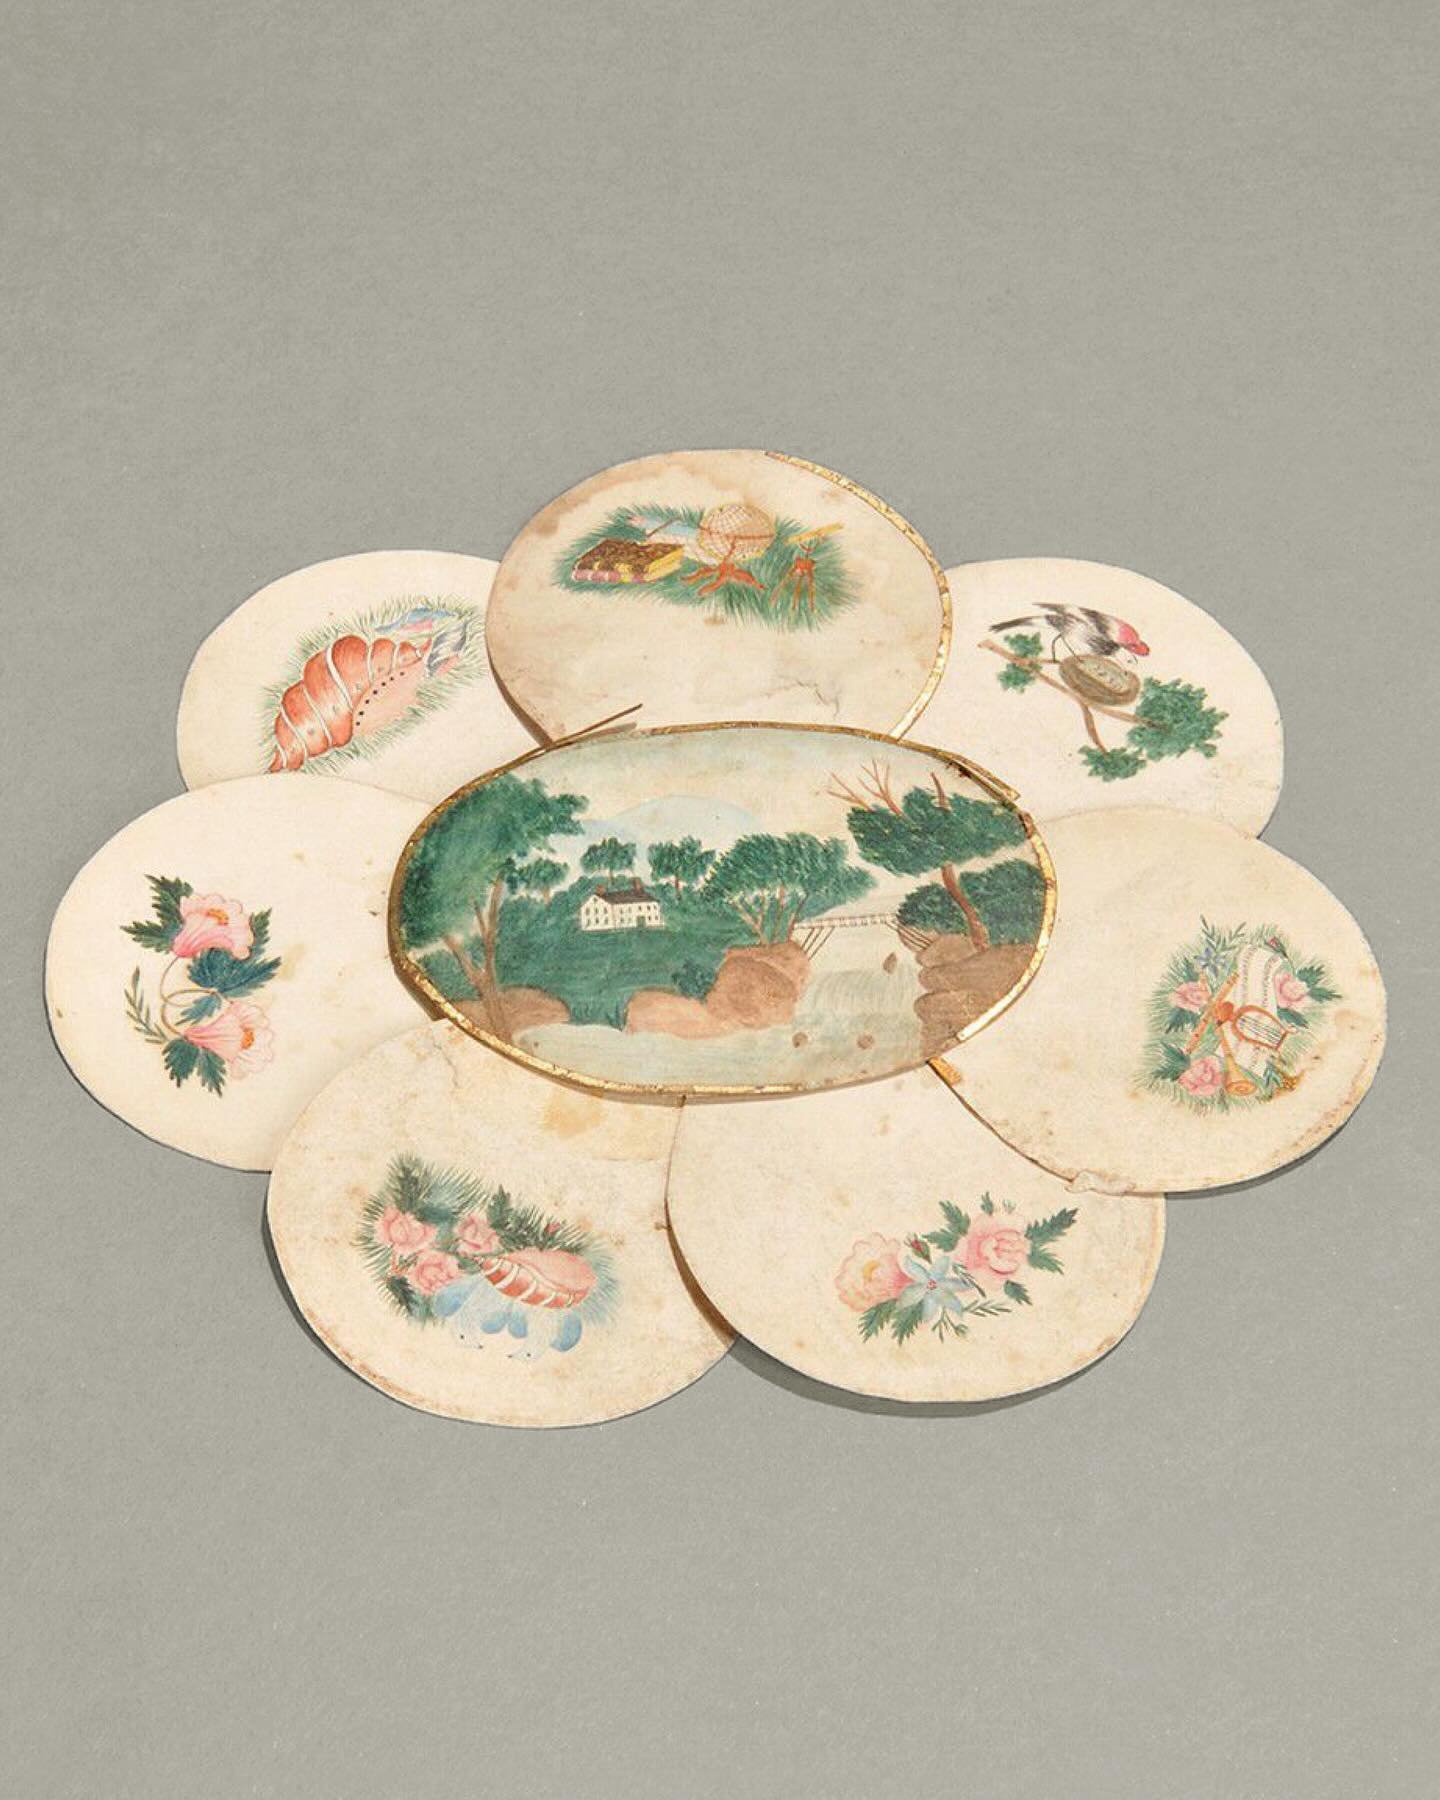 Watercolor valentine with gold leaf edges from the mid 1800s. Likely the work of Edwin Plummer 🌳🎶🐚🪺🌷 #AllKinds_Inspiration via Bonham&rsquo;s.